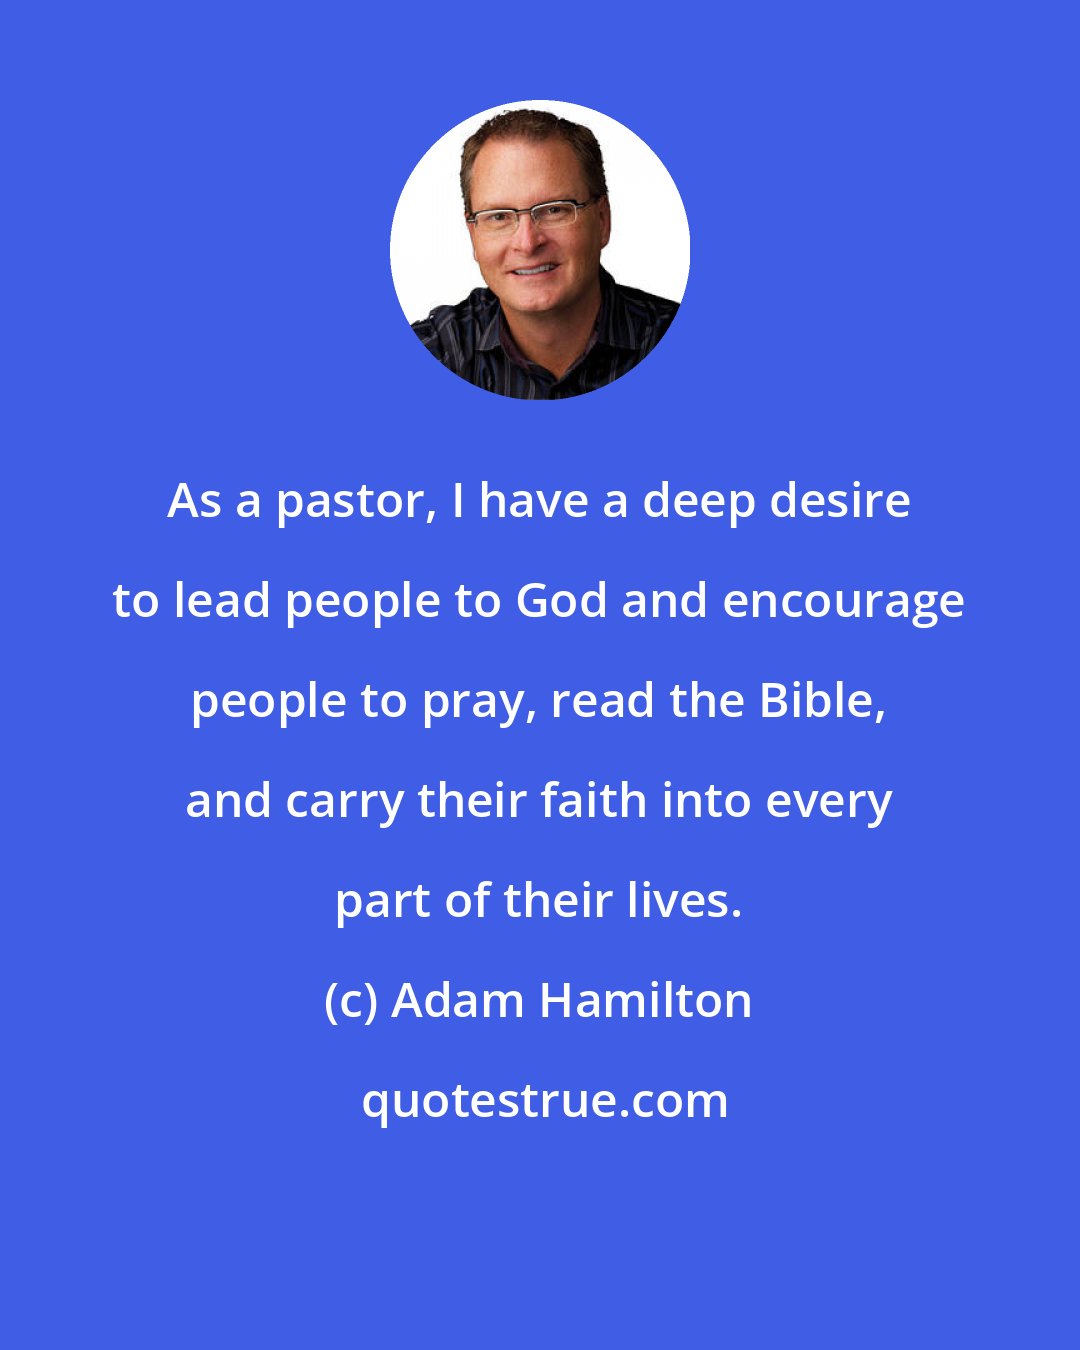 Adam Hamilton: As a pastor, I have a deep desire to lead people to God and encourage people to pray, read the Bible, and carry their faith into every part of their lives.